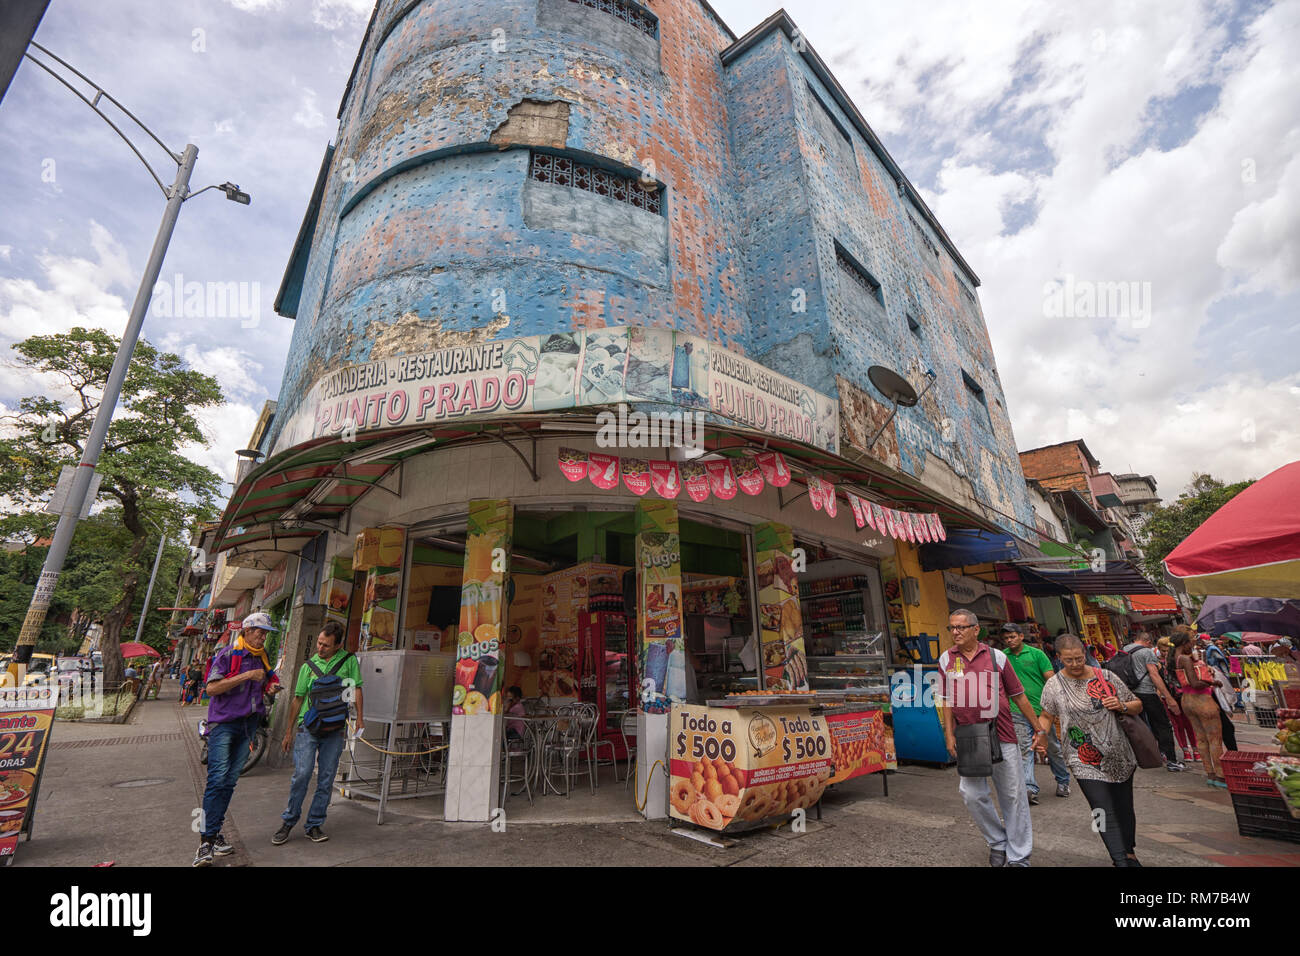 Medellin, Colombia - July 26, 2018: street view of the Prado area Stock Photo